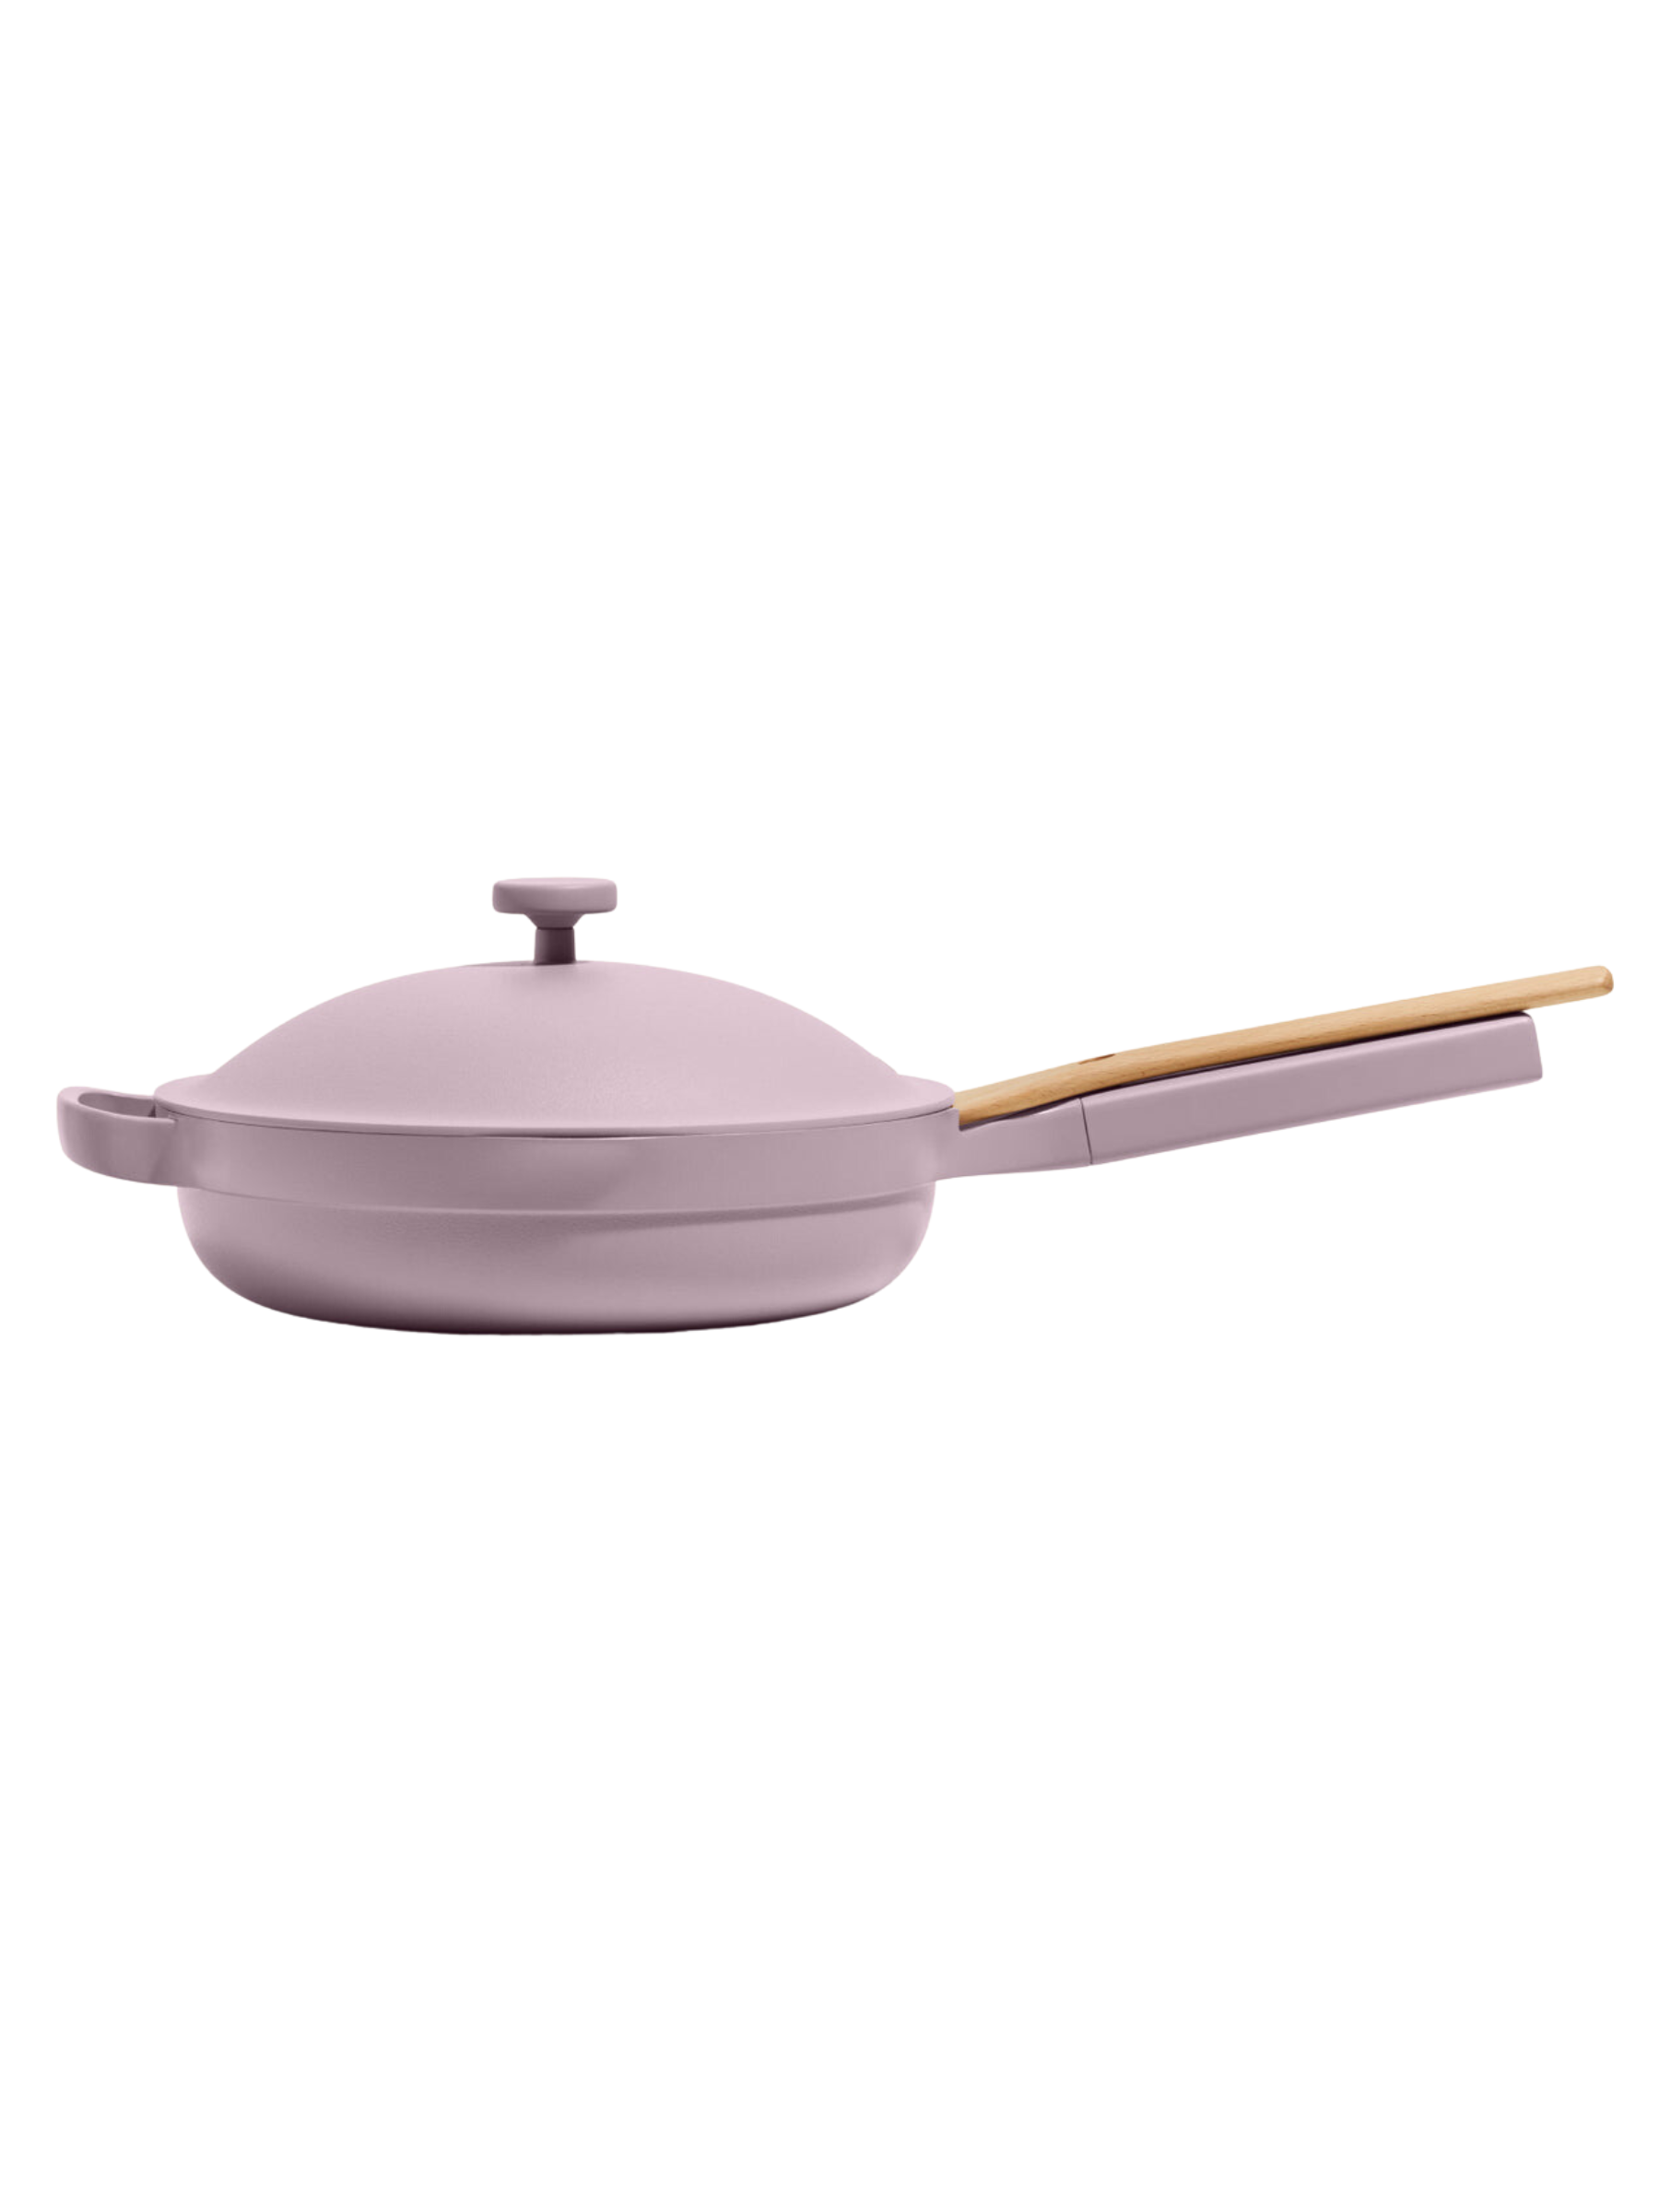 <p>This <a href="https://www.glamour.com/story/our-place-always-pan-review?mbid=synd_msn_rss&utm_source=msn&utm_medium=syndication">Selena Gomez–approved</a> pan is perfect for the dorm-room chef keen on whipping up simple meals—and photographing the whole thing.</p> <p><em>Save when you shop for the best gifts for teenage girls with these <a href="https://www.glamour.com/coupons/nordstrom?mbid=synd_msn_rss&utm_source=msn&utm_medium=syndication">Nordstrom promo codes</a>.</em></p> $150, Our Place. <a href="https://fromourplace.com/products/always-essential-cooking-pan">Get it now!</a><p>Sign up for today’s biggest stories, from pop culture to politics.</p><a href="https://www.glamour.com/newsletter/news?sourceCode=msnsend">Sign Up</a>